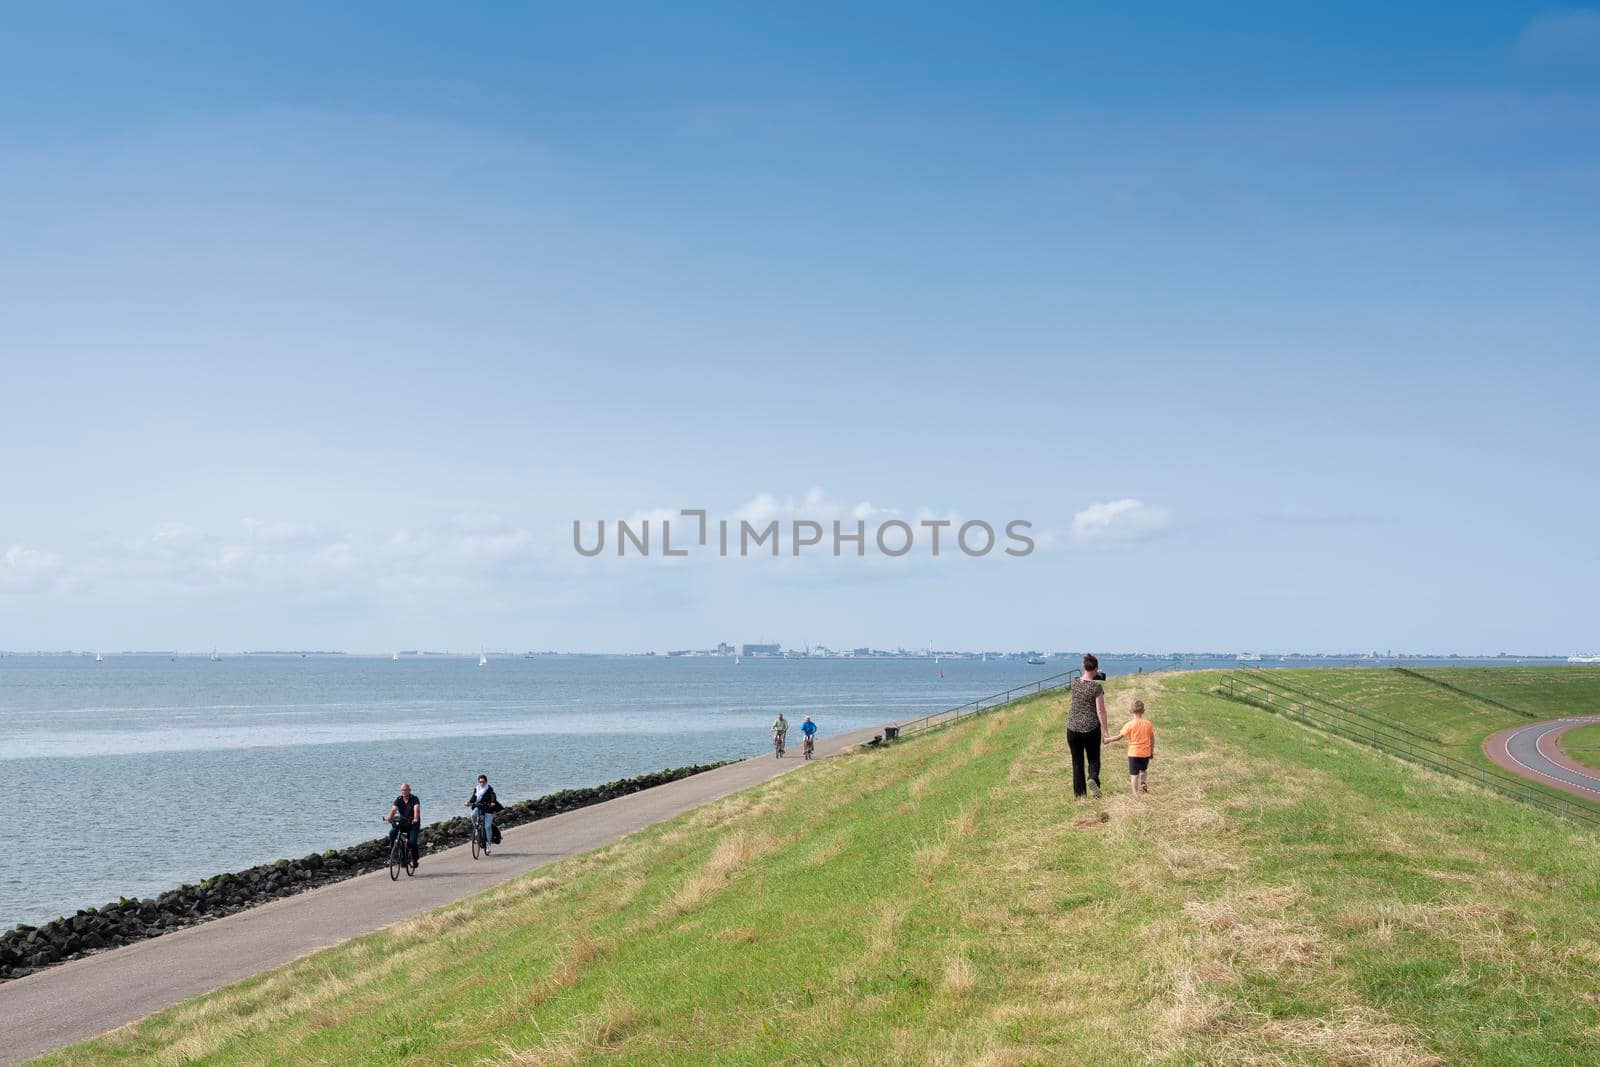 people walk and ride bicycle on dike near oudeschild on the dutch island of texel under blue sky in summer by ahavelaar